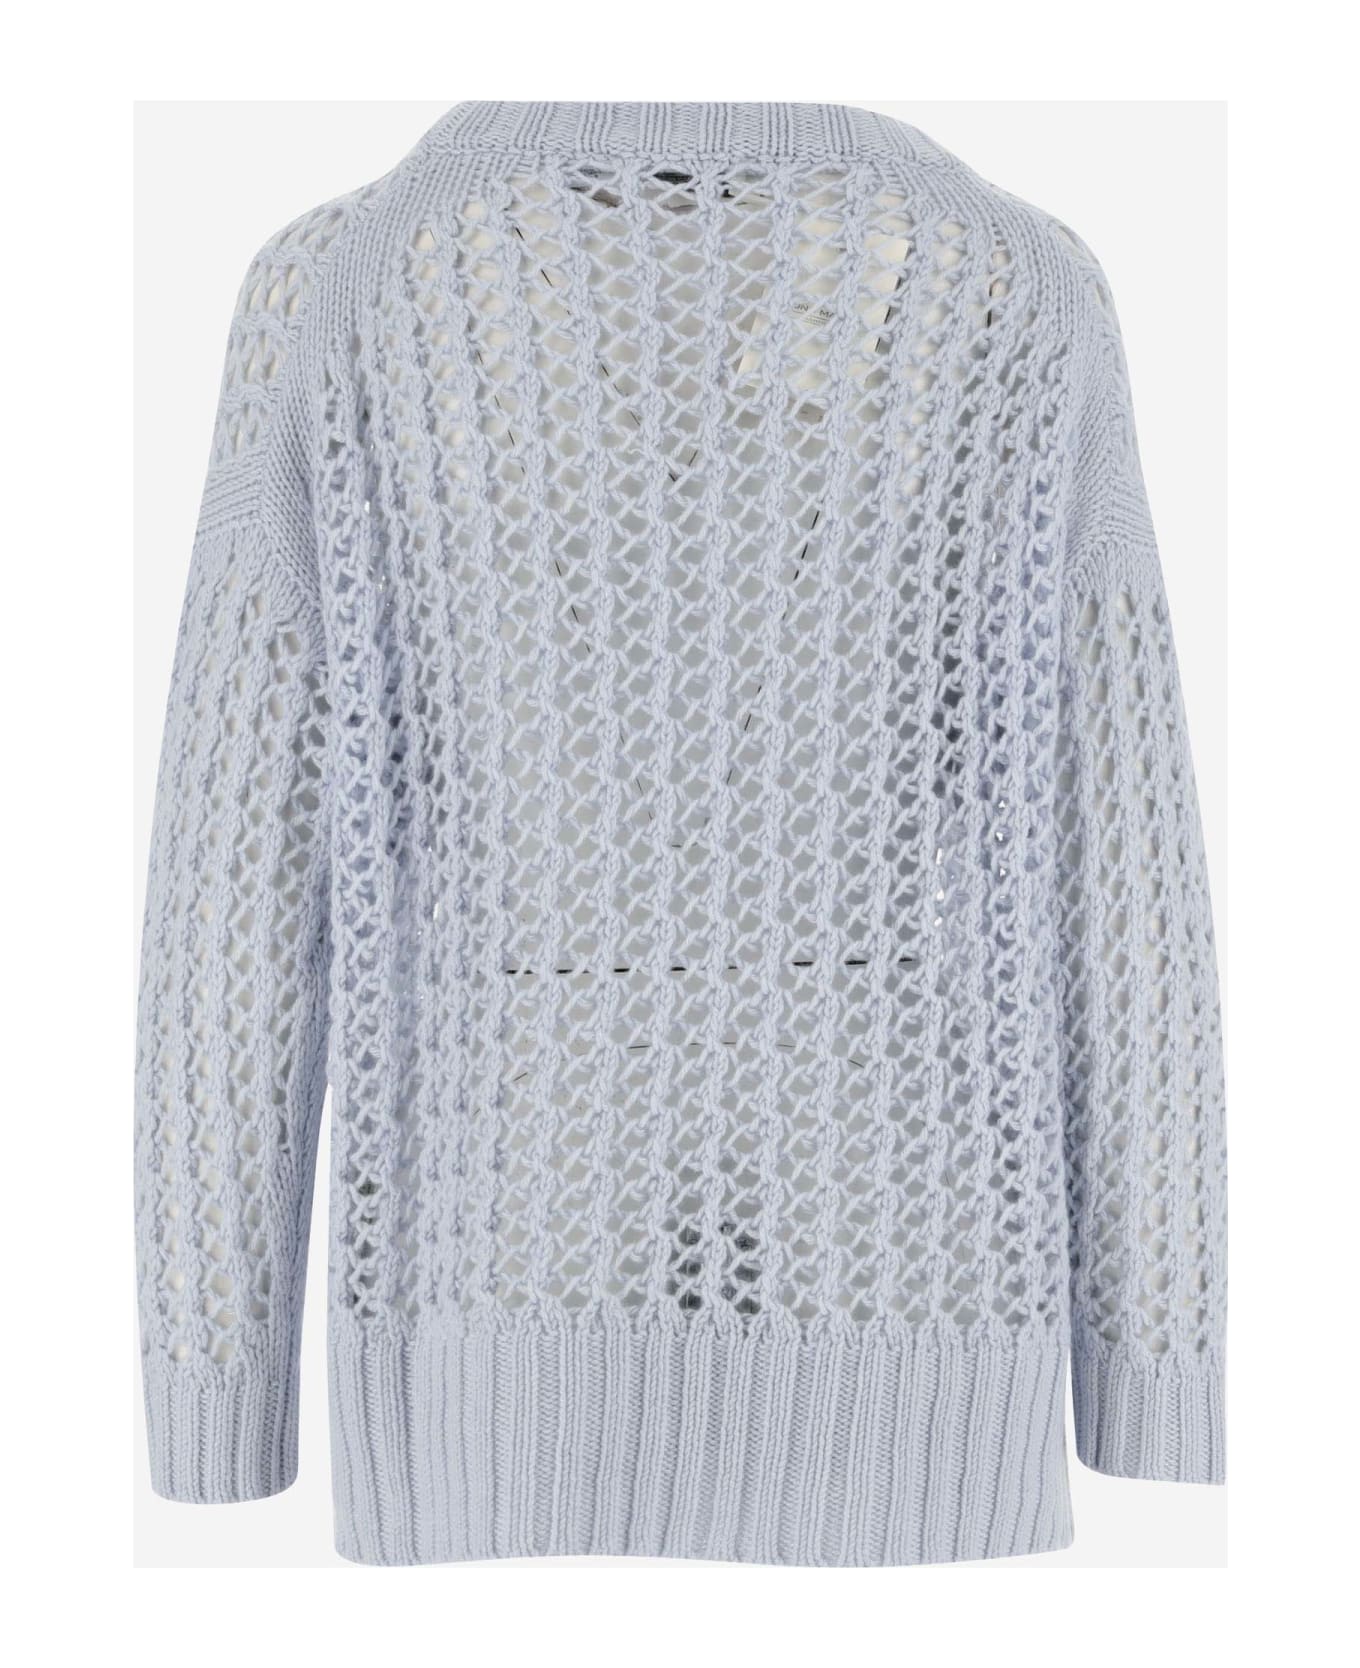 Bruno Manetti Cashmere Sweater - Clear Blue ニットウェア